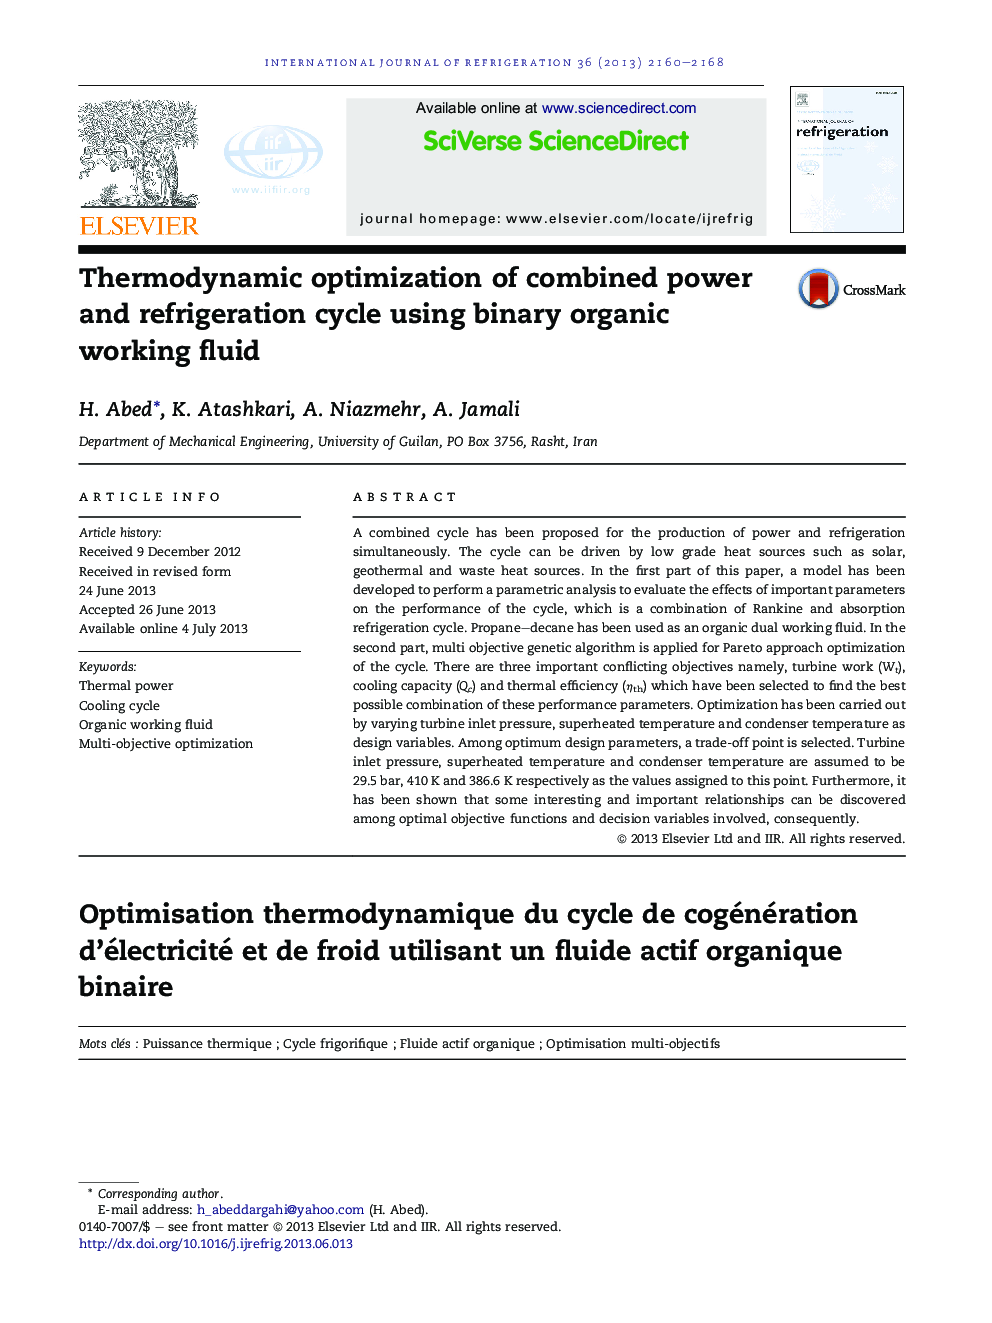 Thermodynamic optimization of combined power and refrigeration cycle using binary organic working fluid